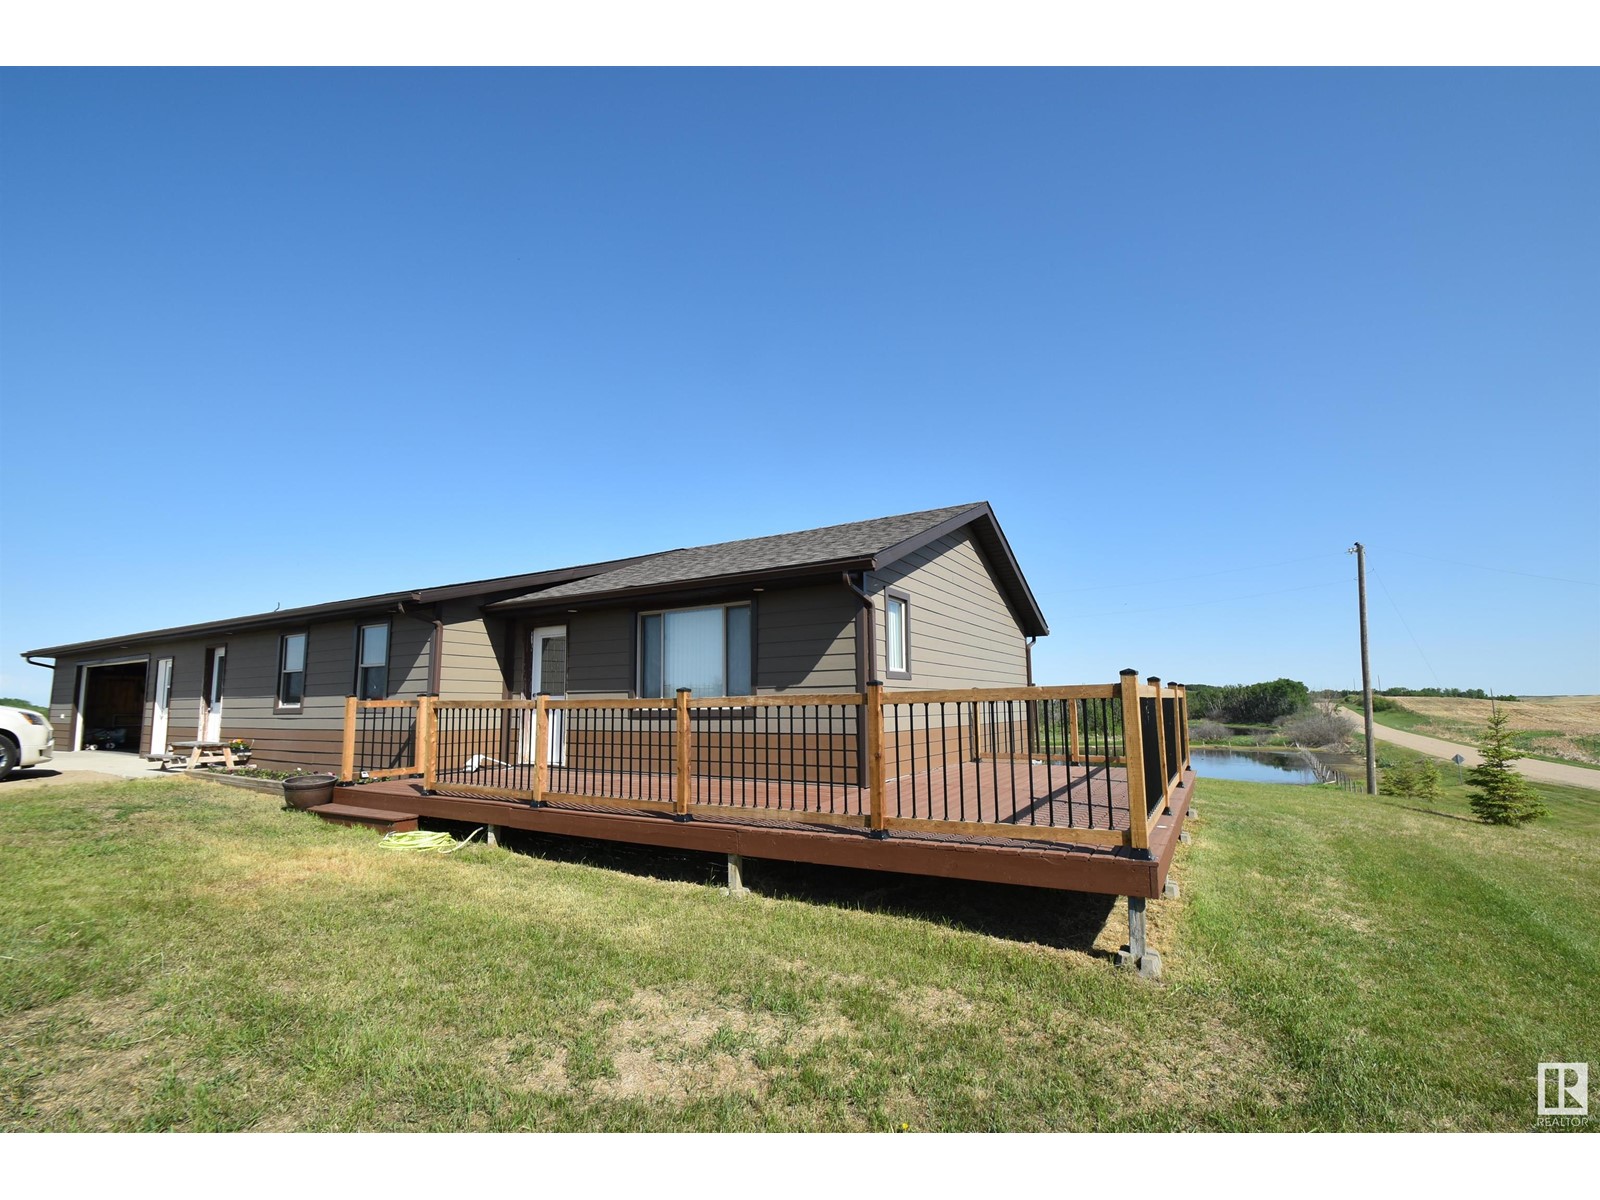 For Sale 57104 Rng Rd 103 Rural St Paul County Alberta T0a3a1 E4332032 Realtorca 6954